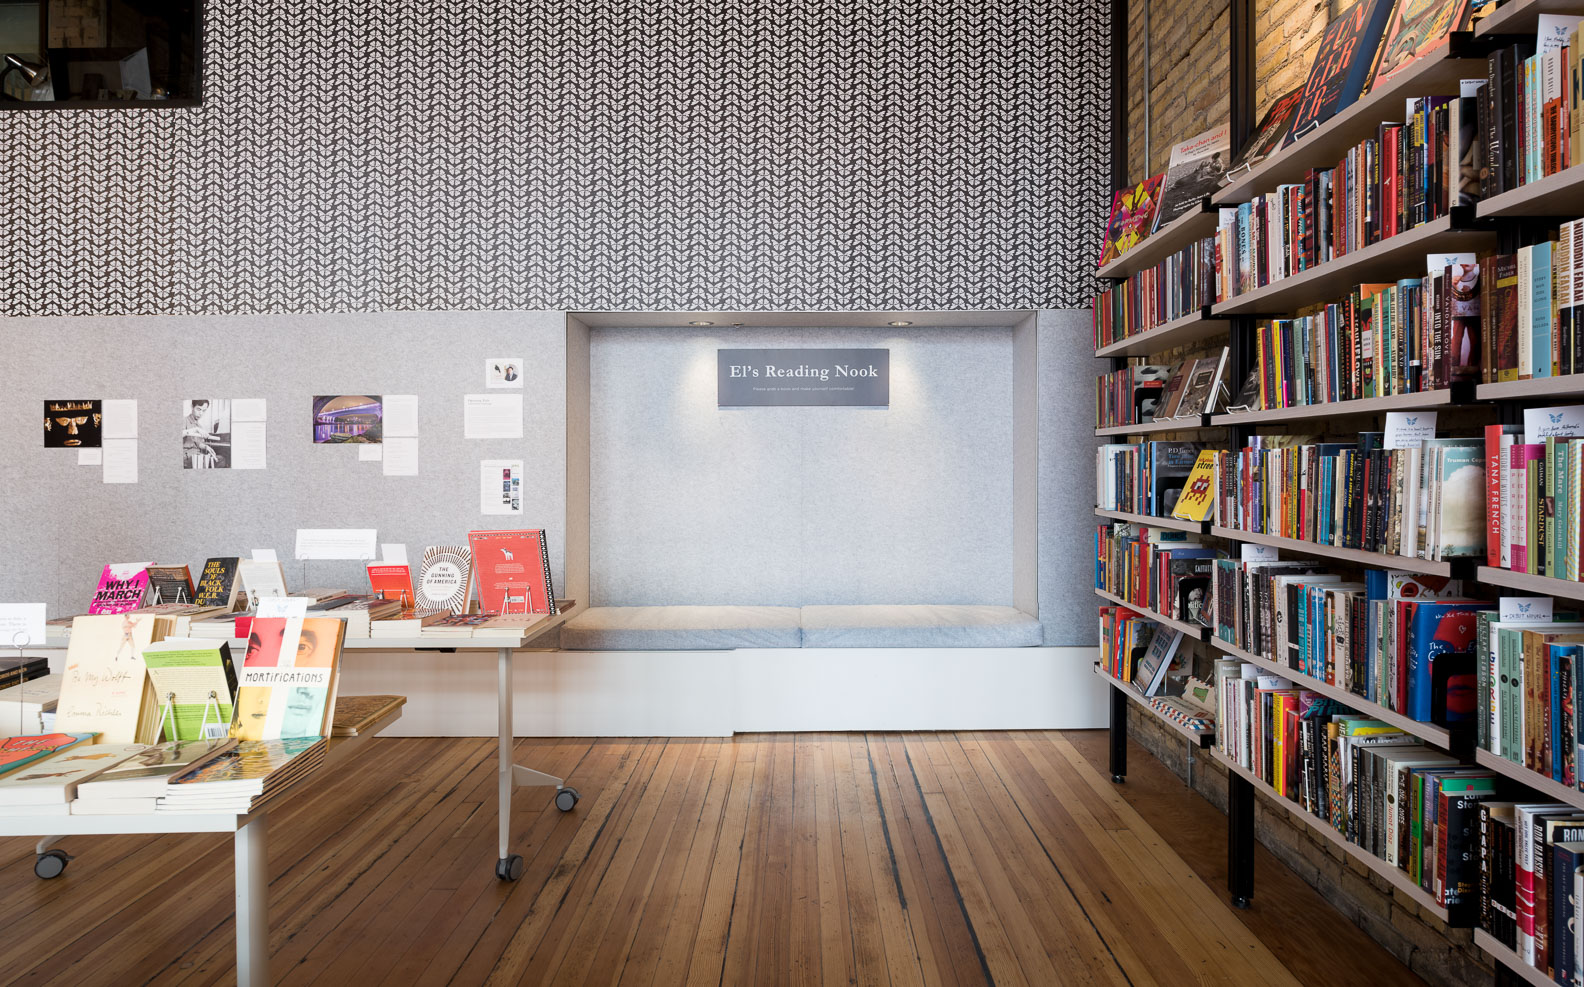 built-in felt reading nook in modern minneapolis bookstore by christian dean architecture